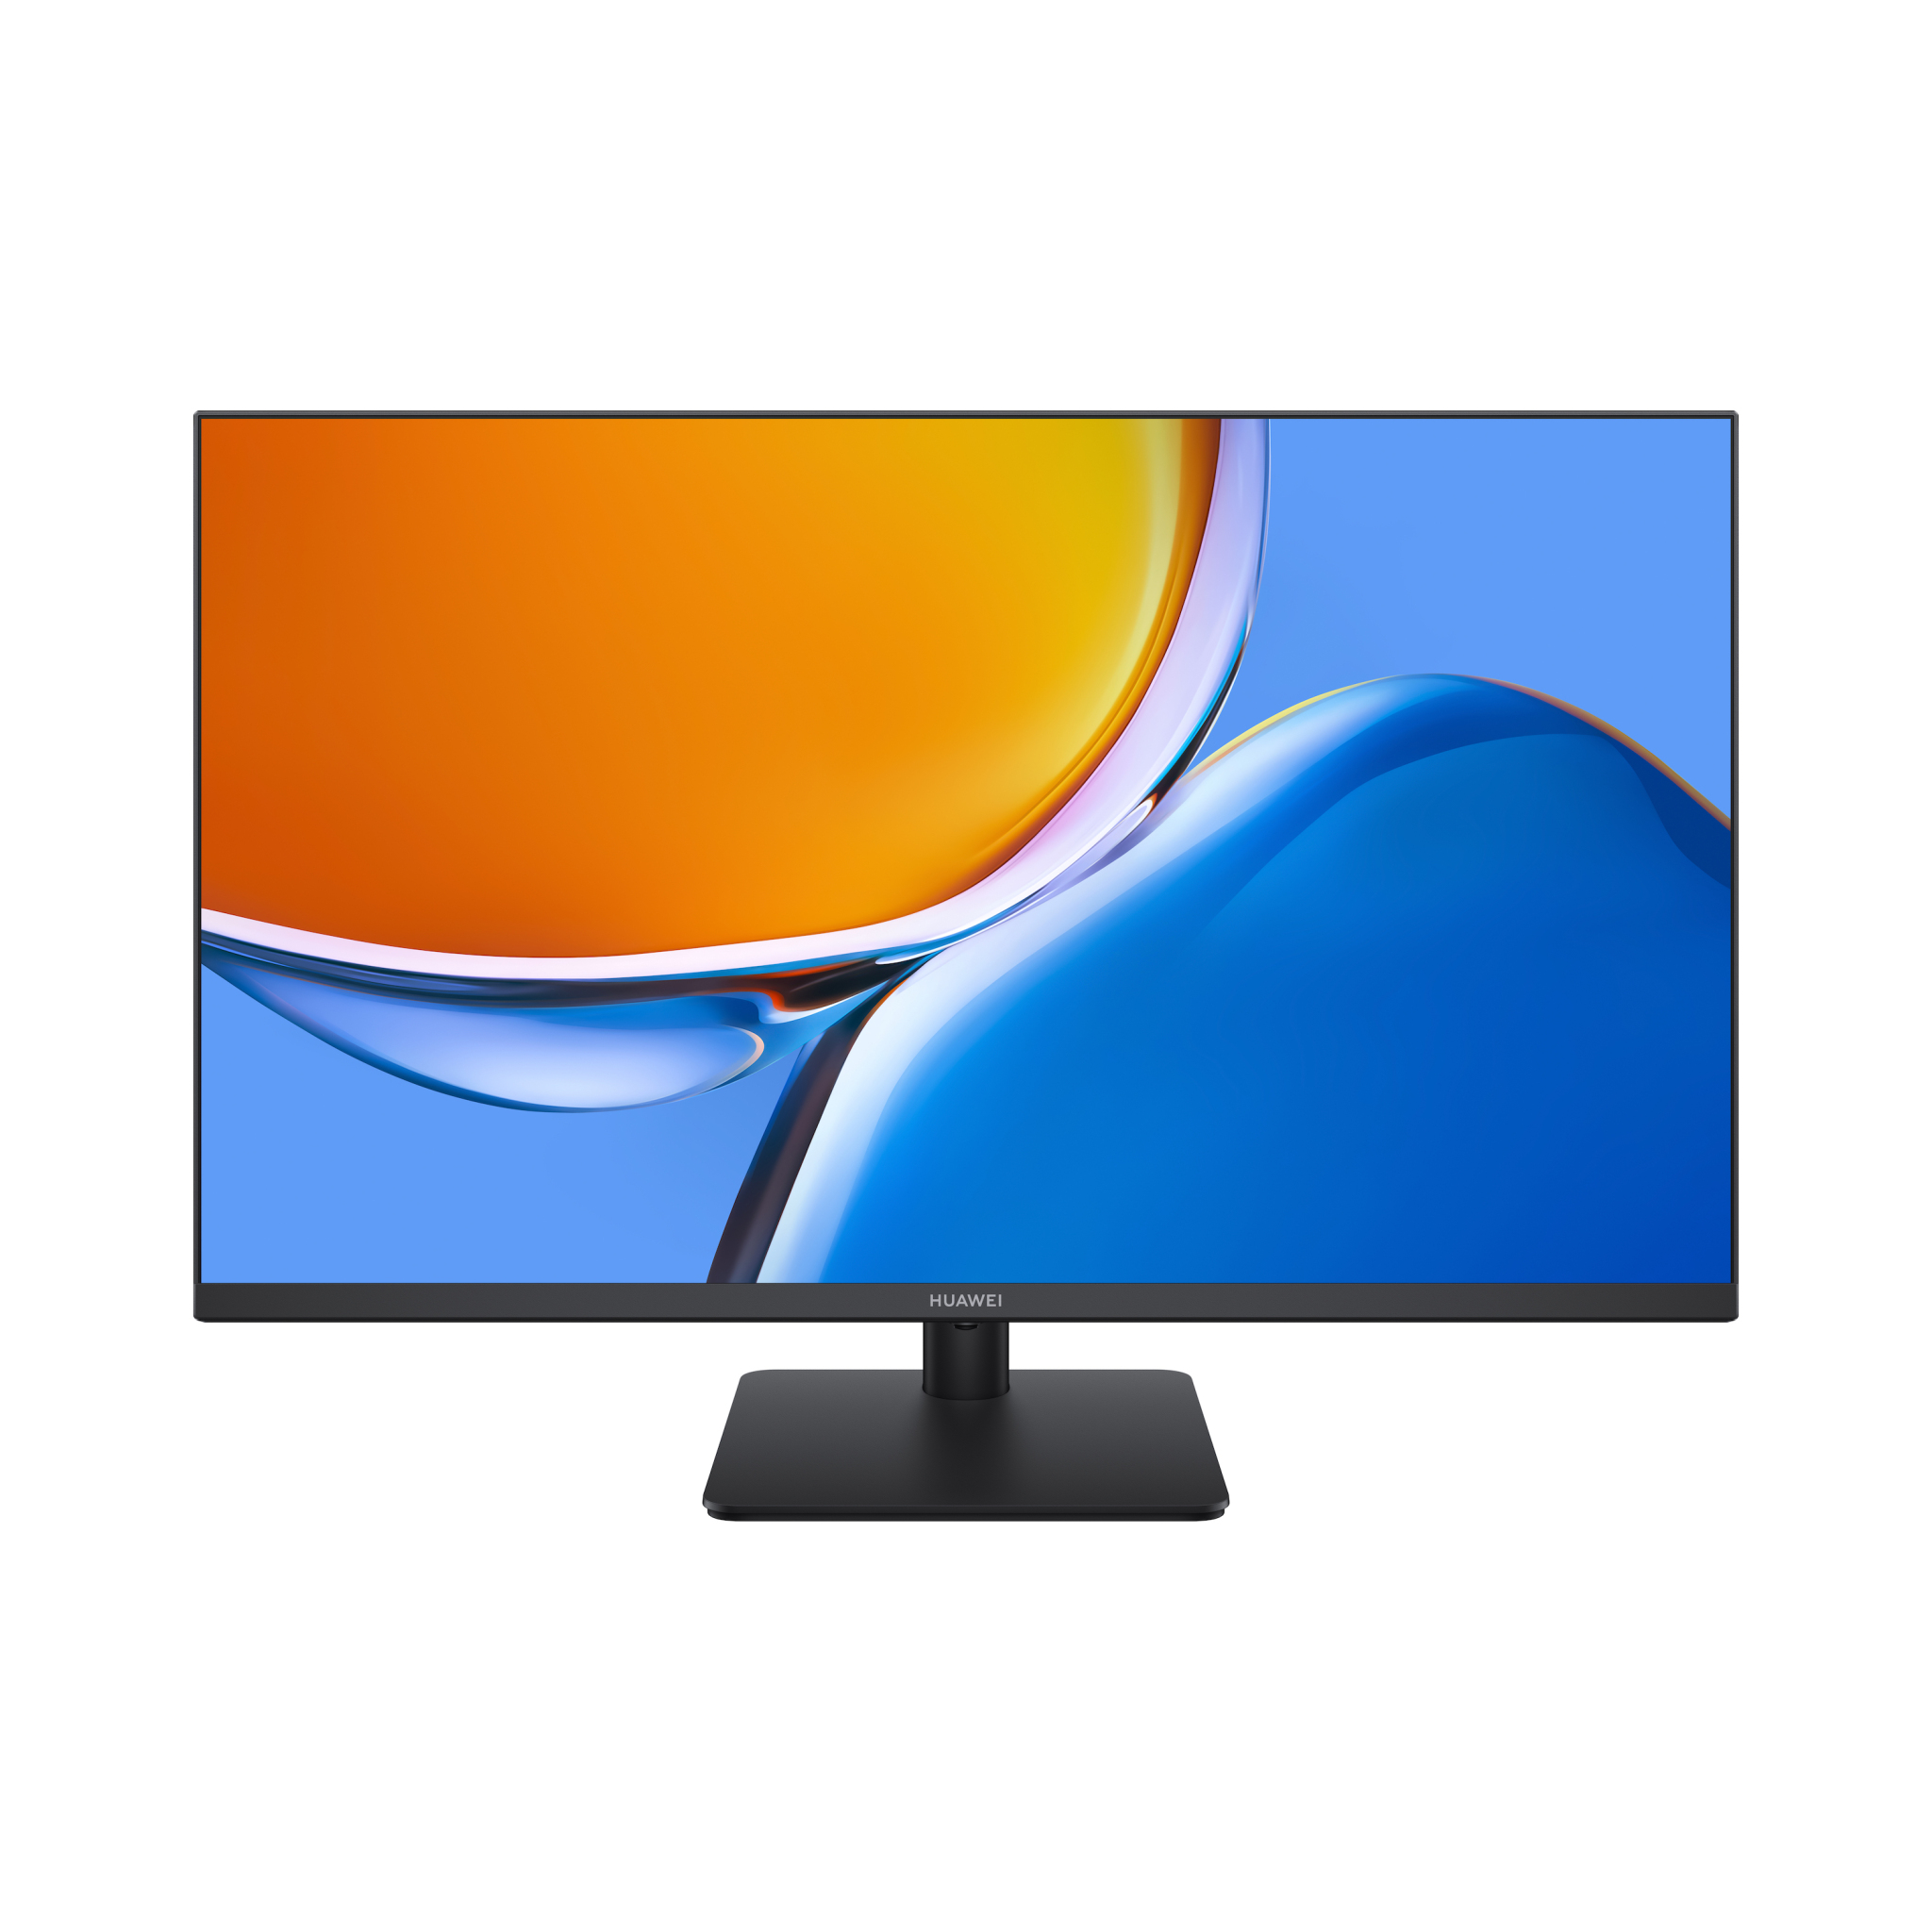 Huawei: introduces its new MateView SE monitor